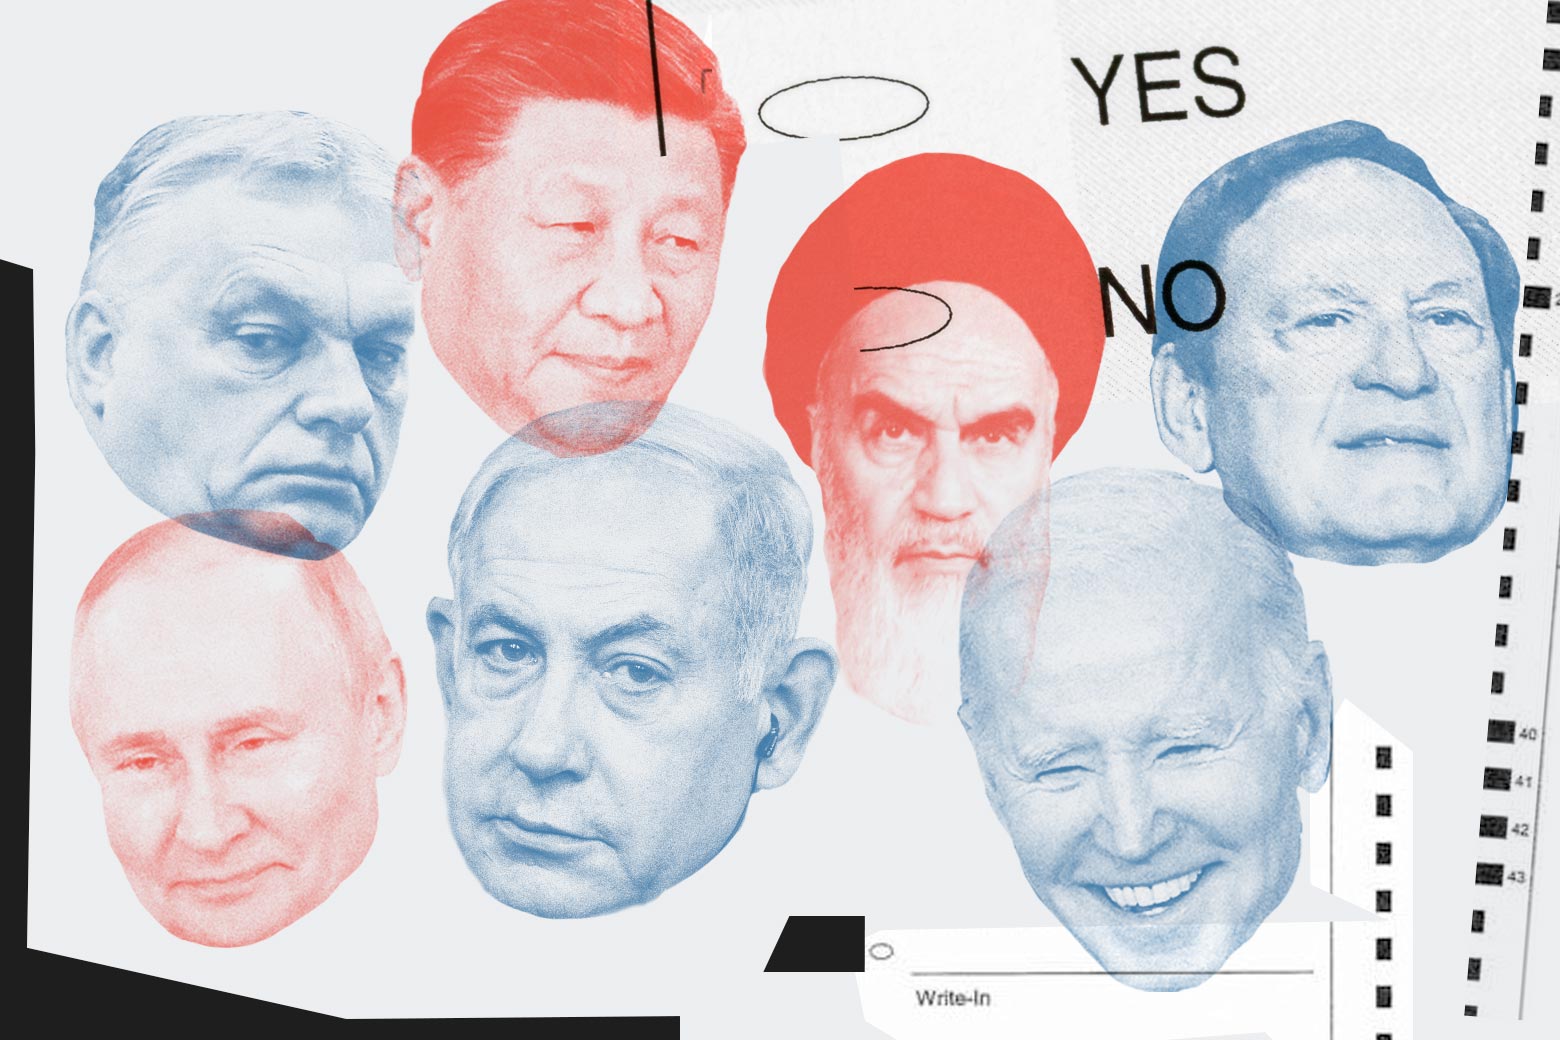 From left to right, Orban, Xi, Ayatollah Khomeini, Sam Alito, Putin, Netanyahu, and Biden, with a write-in at the bottom.